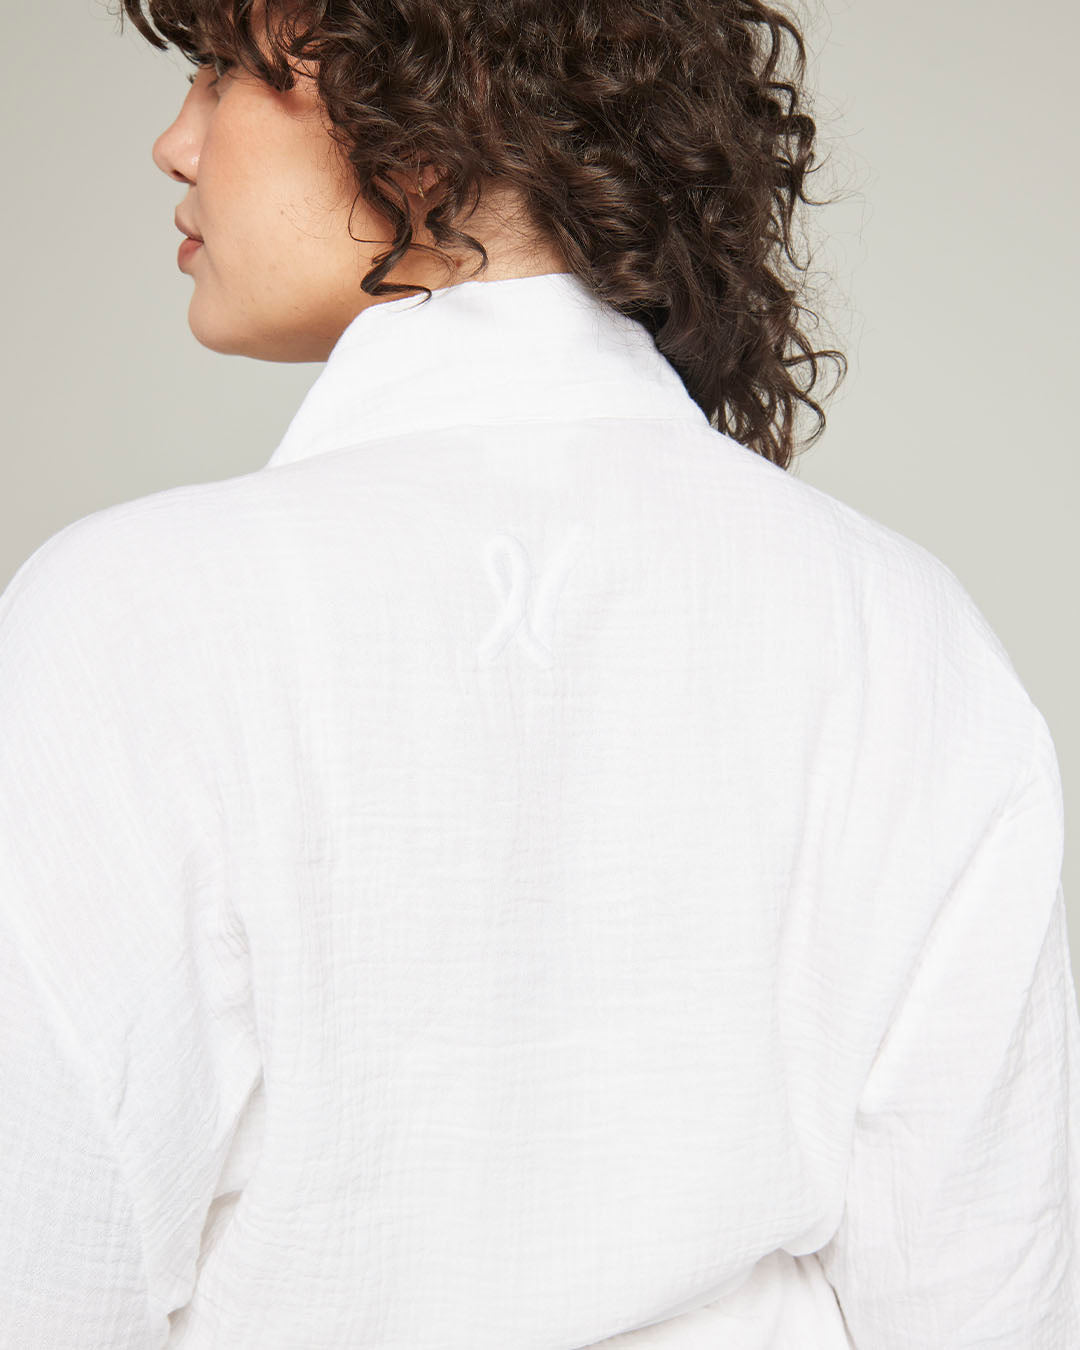 The Classic Belted Robe  - Cotton White